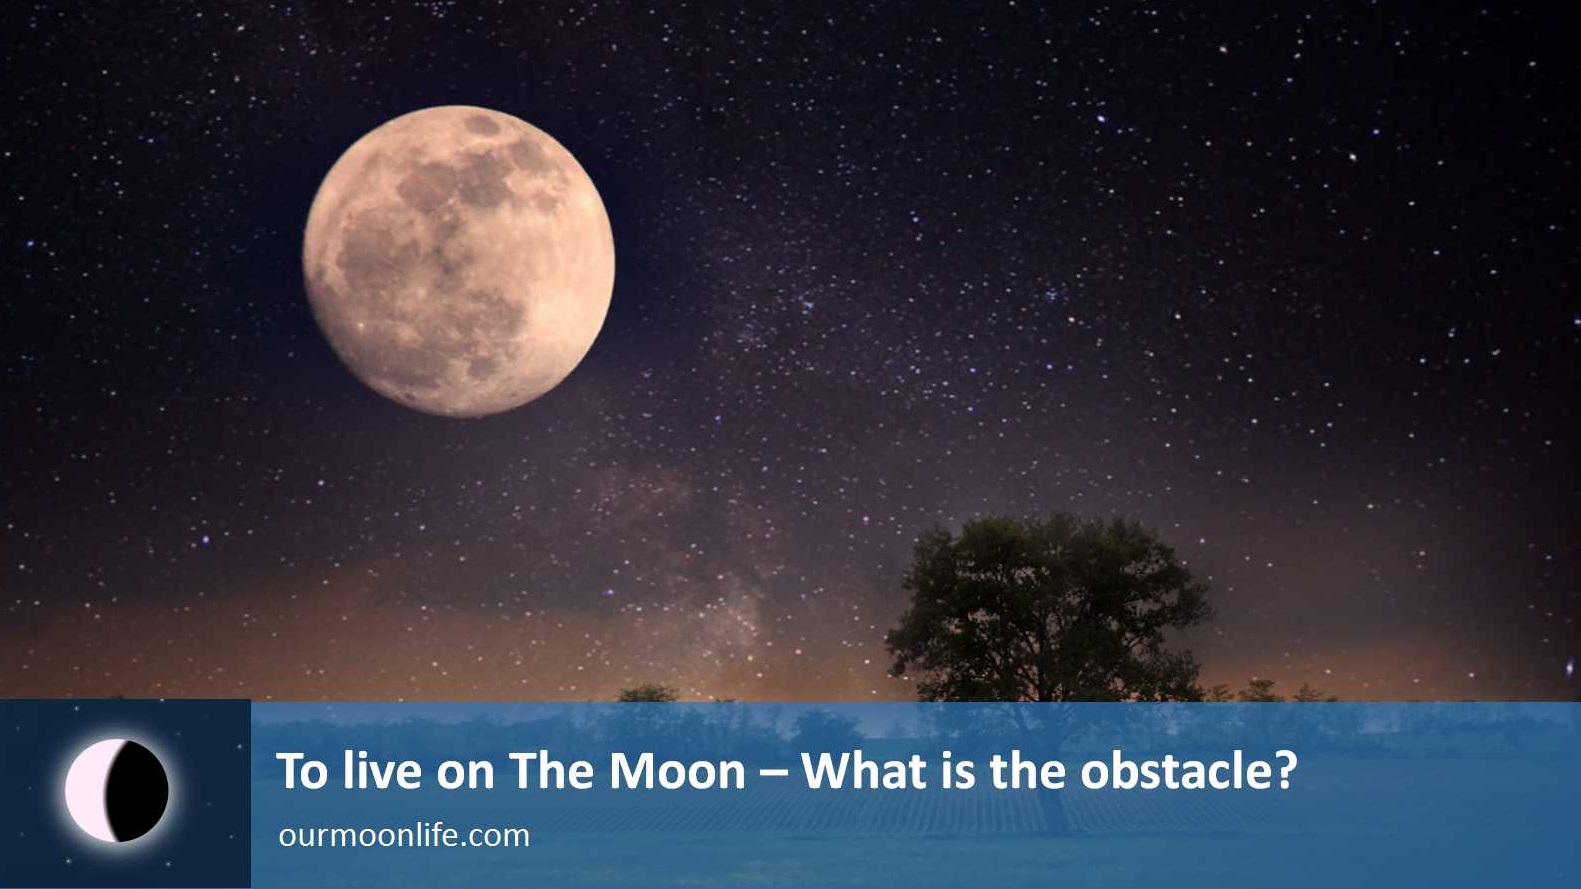 To live on The Moon – What is the obstacle?